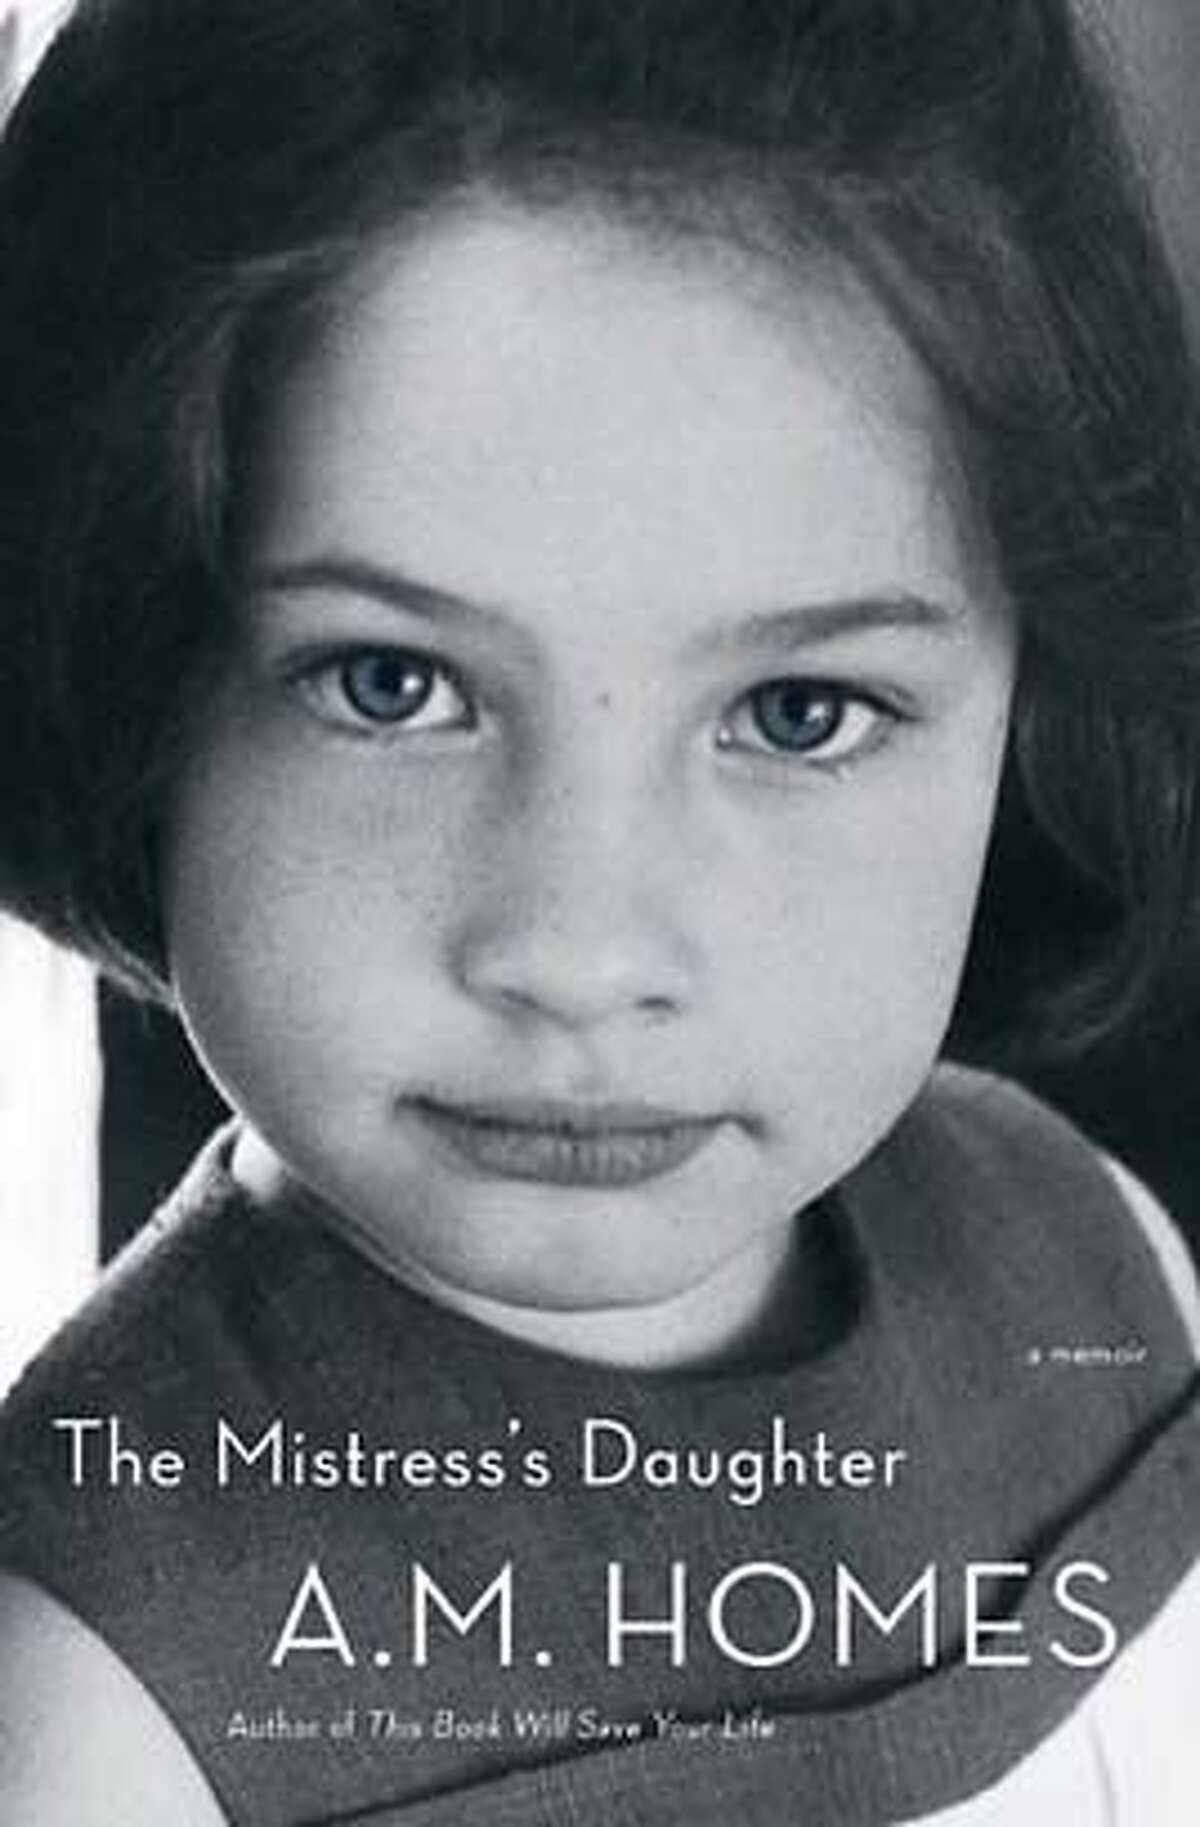 "The Mistress's Daughter" by A.M. Homes